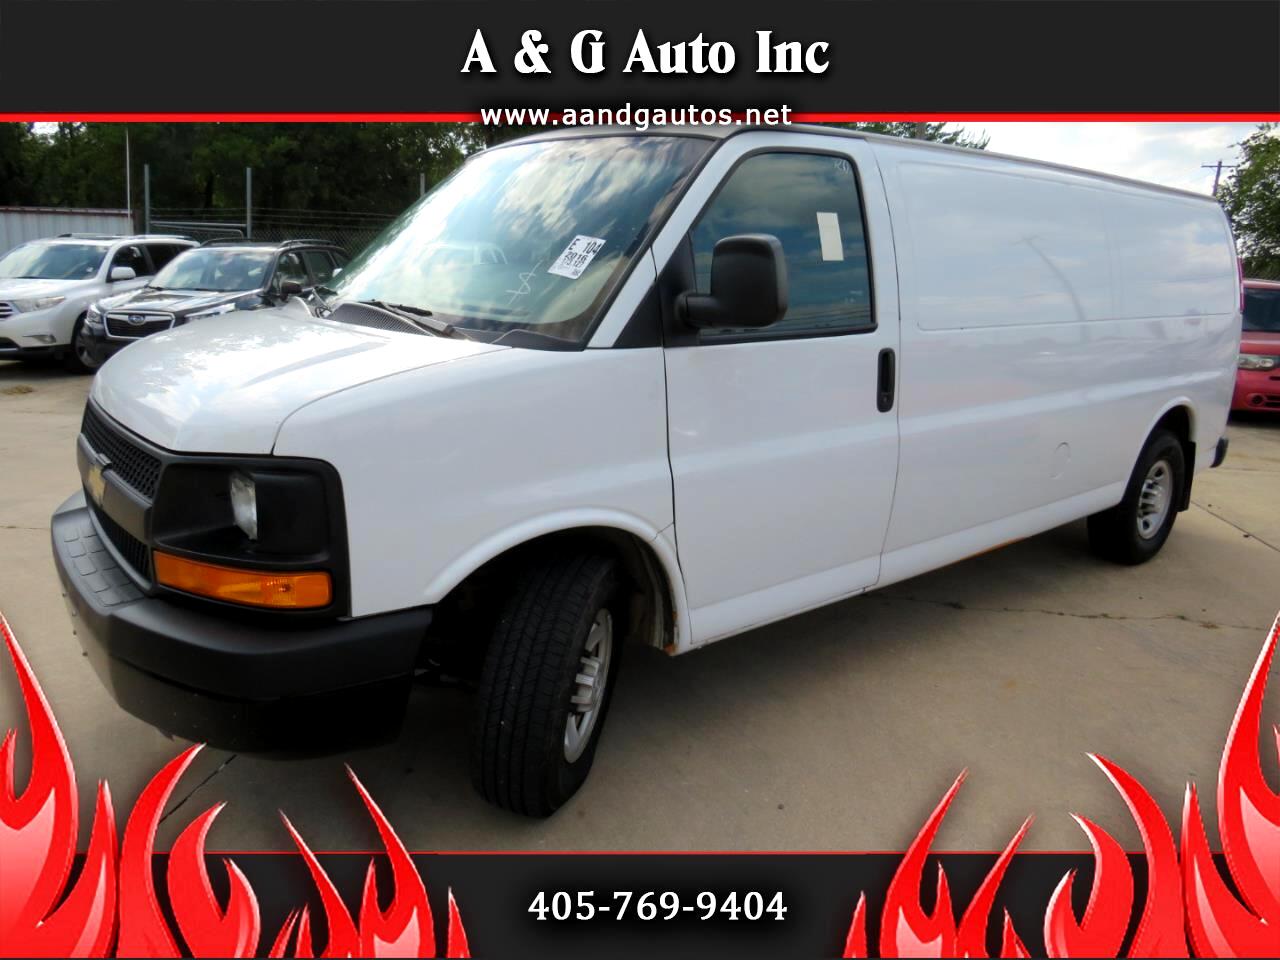 2016 Chevrolet Express for sale in Oklahoma City OK 73141 by A & G Auto Inc